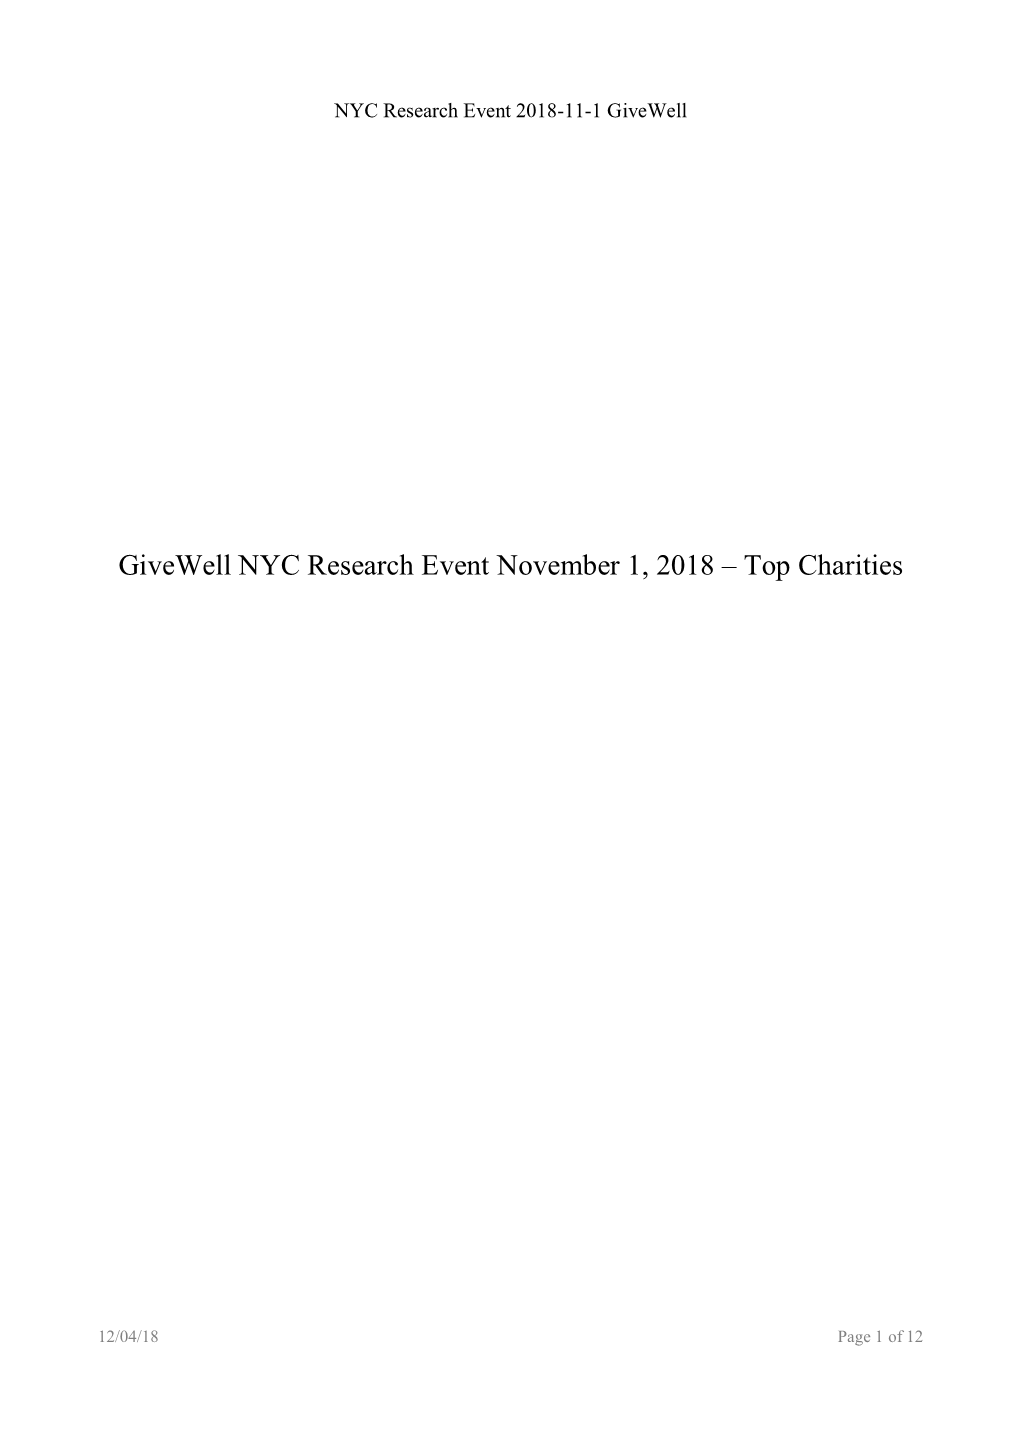 Givewell NYC Research Event November 1, 2018 – Top Charities